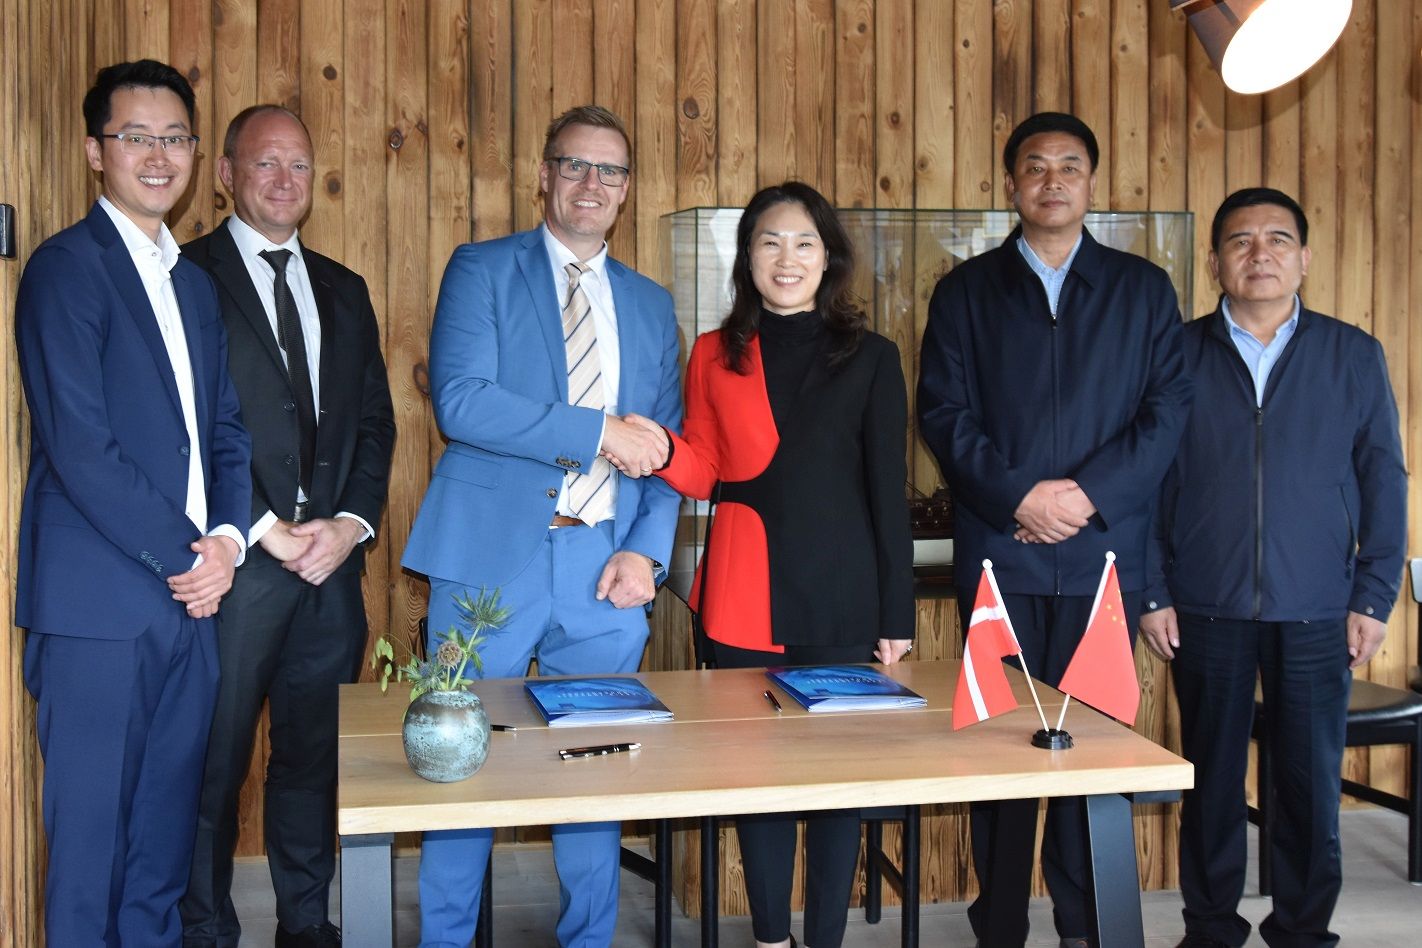 Signing of the agreement between BioMar and Long Yang Xia in Brande, Denmark